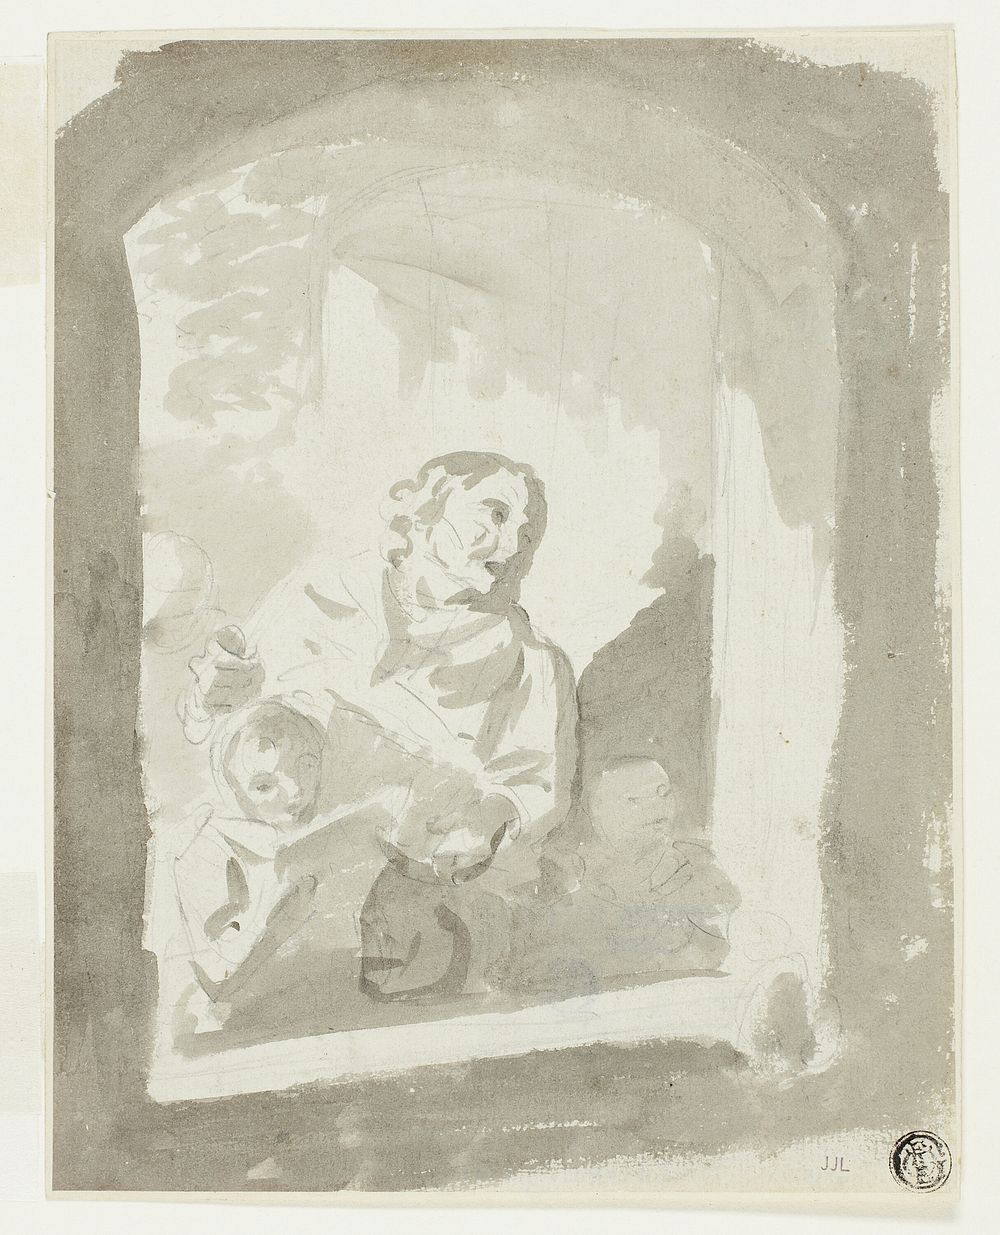 Man and Two Children at Window by Style of Jean Louis de Marne